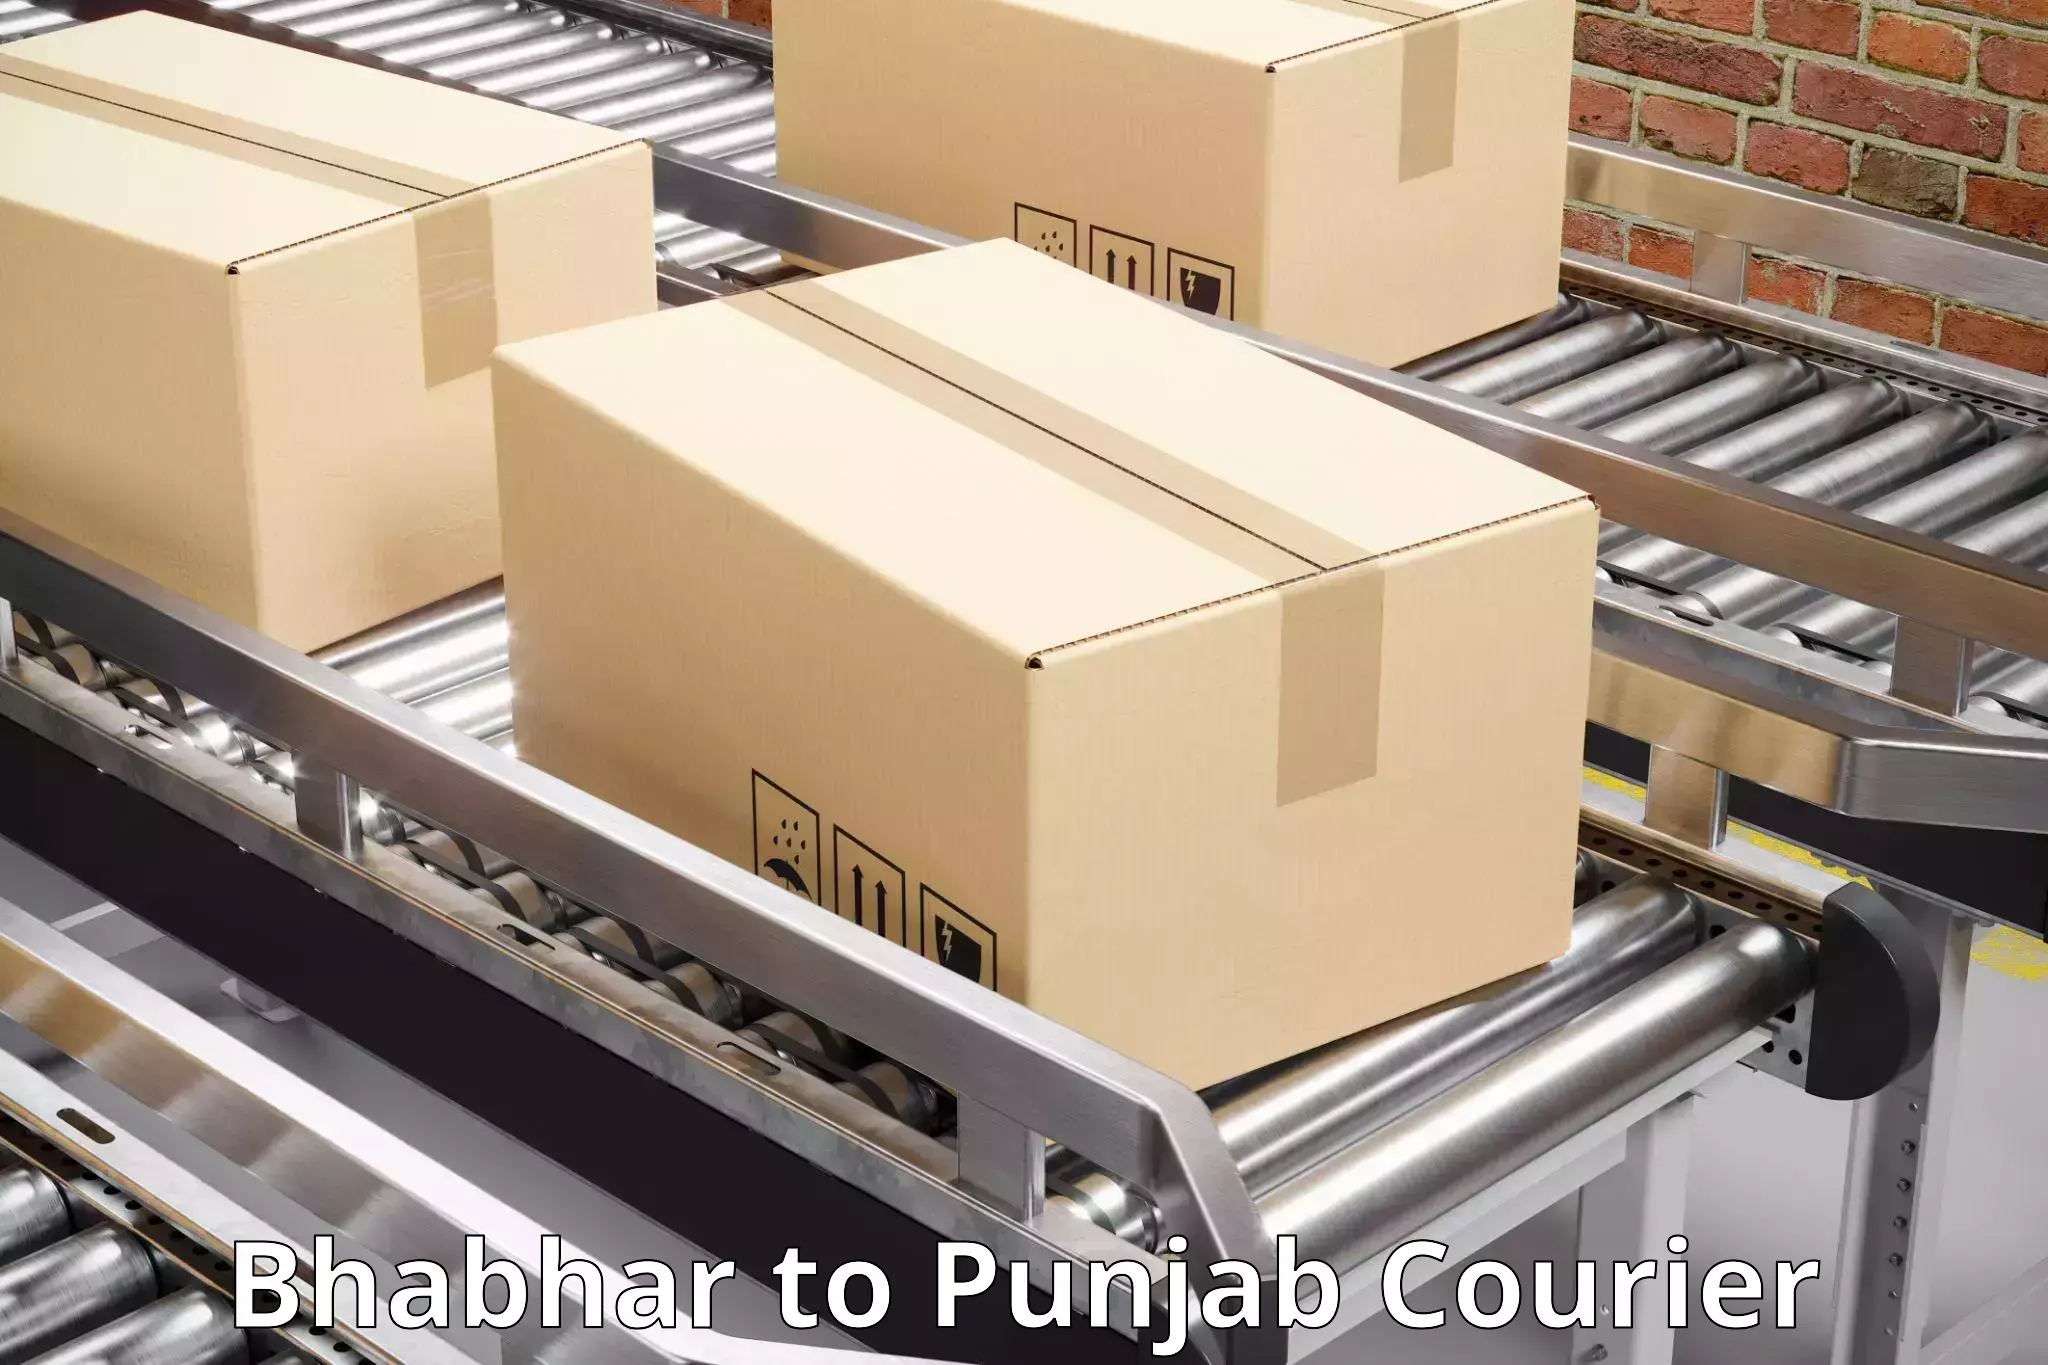 Round-the-clock parcel delivery Bhabhar to Ludhiana